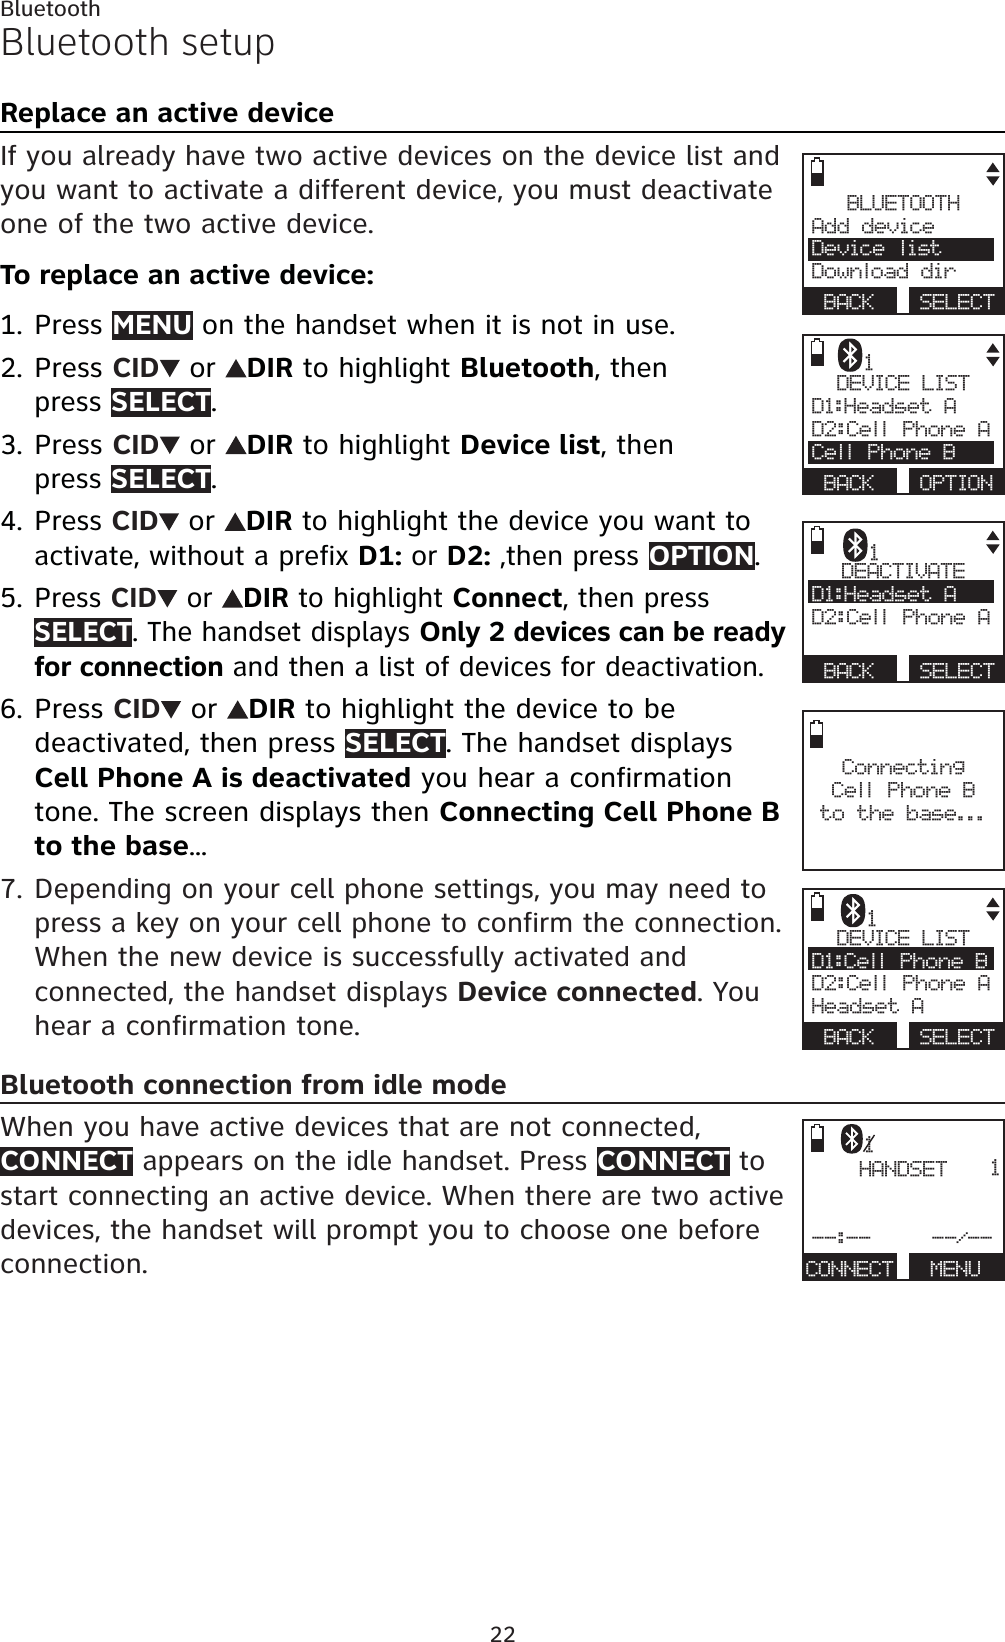 22BluetoothDEVICE LISTD1:Headset AD2:Cell Phone ACell Phone BBACK OPTION1Bluetooth setupReplace an active deviceIf you already have two active devices on the device list and you want to activate a different device, you must deactivate one of the two active device.To replace an active device:Press MENU on the handset when it is not in use.Press CID  or  DIR to highlight Bluetooth, then press SELECT.Press CID  or  DIR to highlight Device list, then press SELECT.Press CID  or  DIRto highlight the device you want to activate, without a prefix D1: or D2: ,then press OPTION.Press CID  or  DIR to highlight Connect, then pressSELECT. The handset displays Only 2 devices can be ready for connection and then a list of devices for deactivation.Press CID  or  DIR to highlight the device to be deactivated, then press SELECT. The handset displays Cell Phone A is deactivated you hear a confirmation tone. The screen displays then Connecting Cell Phone B to the base...Depending on your cell phone settings, you may need to press a key on your cell phone to confirm the connection. When the new device is successfully activated and connected, the handset displays Device connected. You hear a confirmation tone.Bluetooth connection from idle modeWhen you have active devices that are not connected, CONNECT appears on the idle handset. Press CONNECT to start connecting an active device. When there are two active devices, the handset will prompt you to choose one before connection.1.2.3.4.5.6.7.BLUETOOTHAdd device Device listDownload dirBACK SELECTConnecting Cell Phone B to the base...HANDSET--:--     --/--CONNECT   MENU11DEACTIVATED1:Headset AD2:Cell Phone ABACK SELECT1DEVICE LISTD1:Cell Phone B   D2:Cell Phone AHeadset ABACK SELECT1